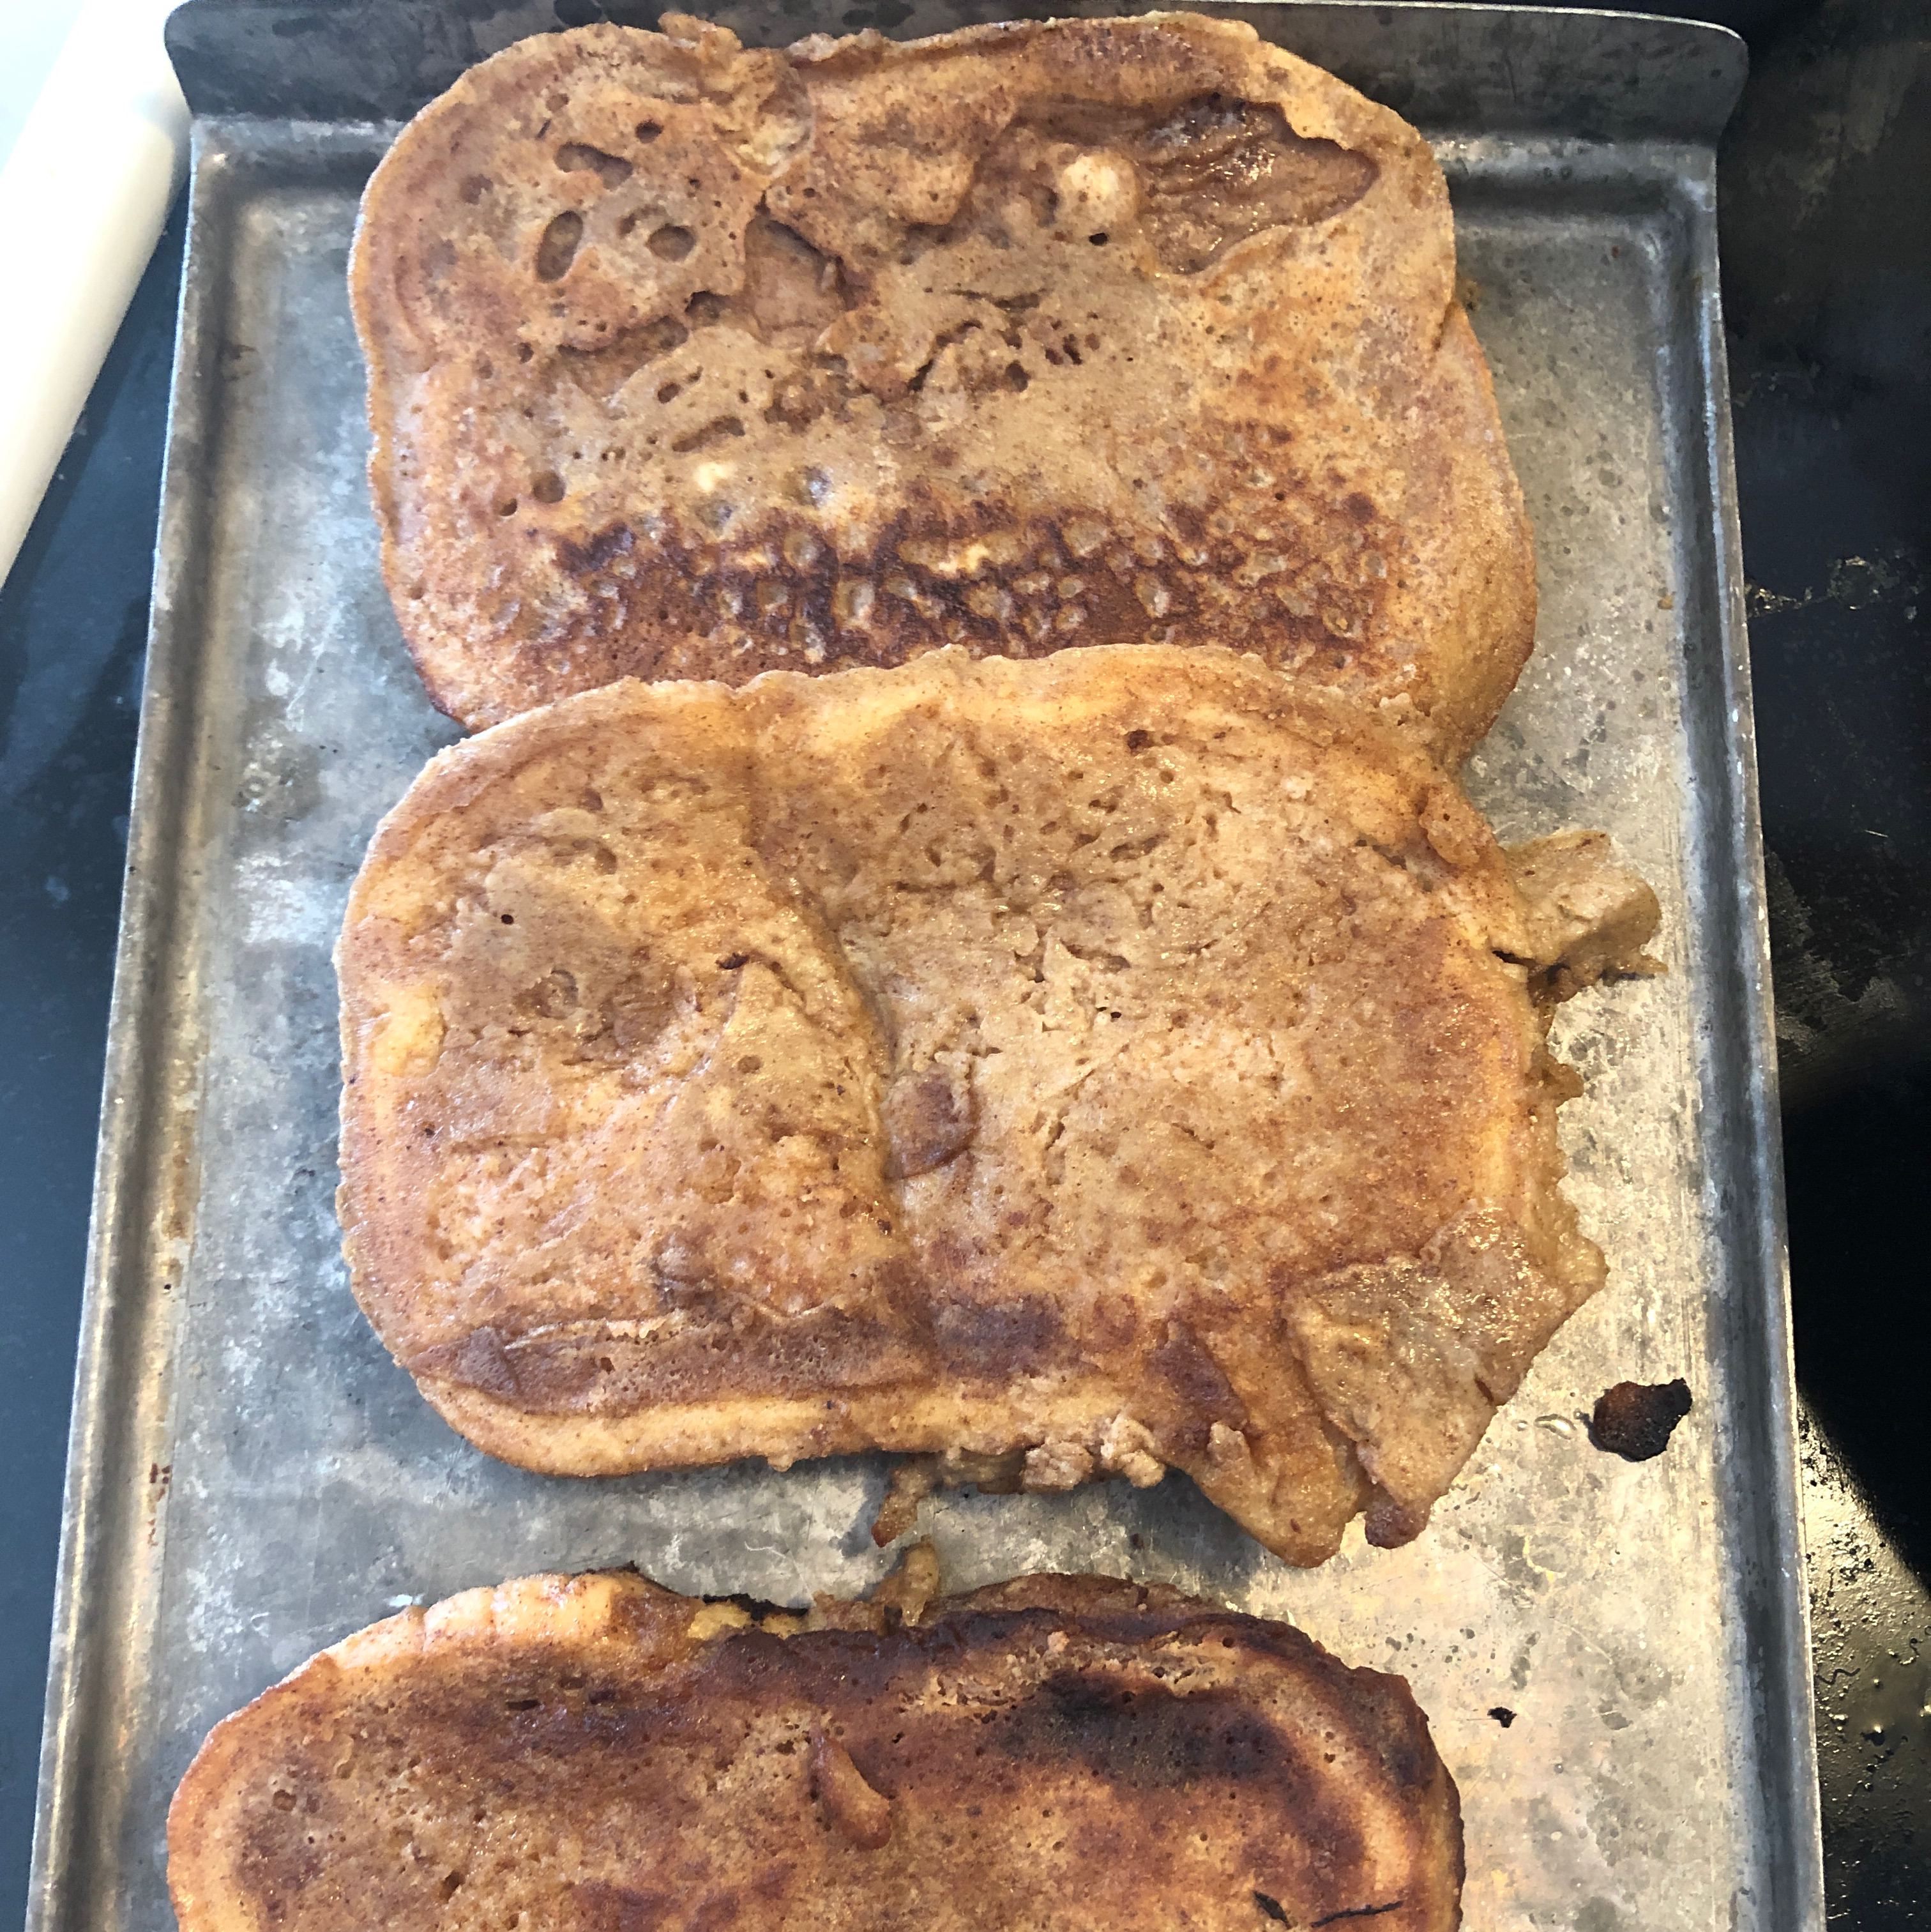 Peanut Butter French Toast DaFranklins